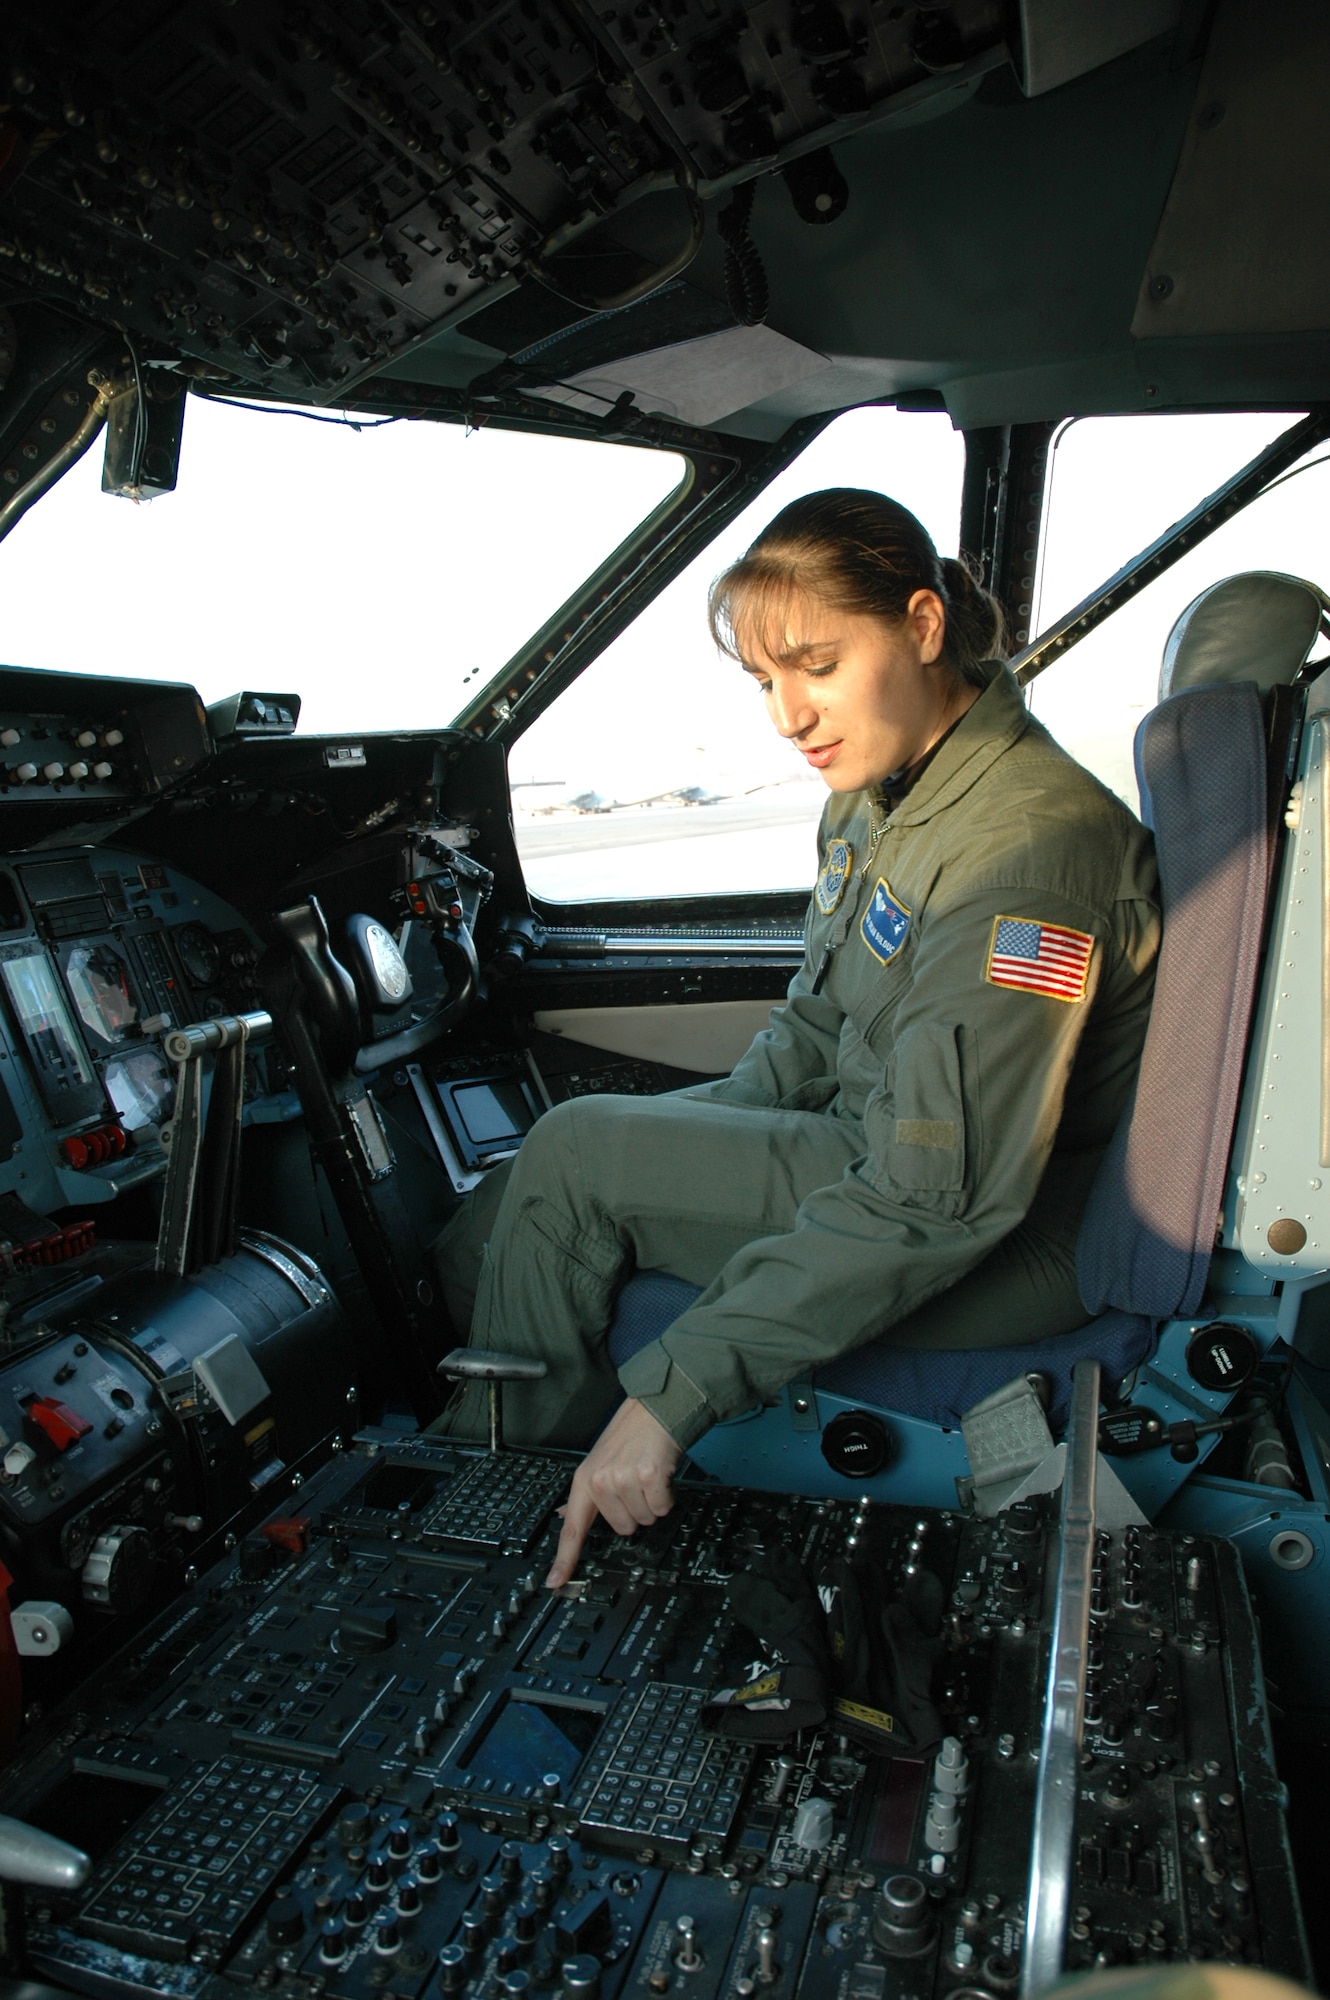 FLYING HIGH -- Staff Sgt. Susan Bolduc, 337th Airlift Squadron loadmaster, Westover Air Reserve Base, Mass., sits in her future workplace - the cockpit of a Patriot Wing C-5. Sergeant Bolduc recently learned she will attend Officer Training School. Once she earns her commission, she plans on pursuing her lifelong dream of being a C-5 pilot. (U.S. Air Force photo by Senior Master Sgt. Sandi Michon)